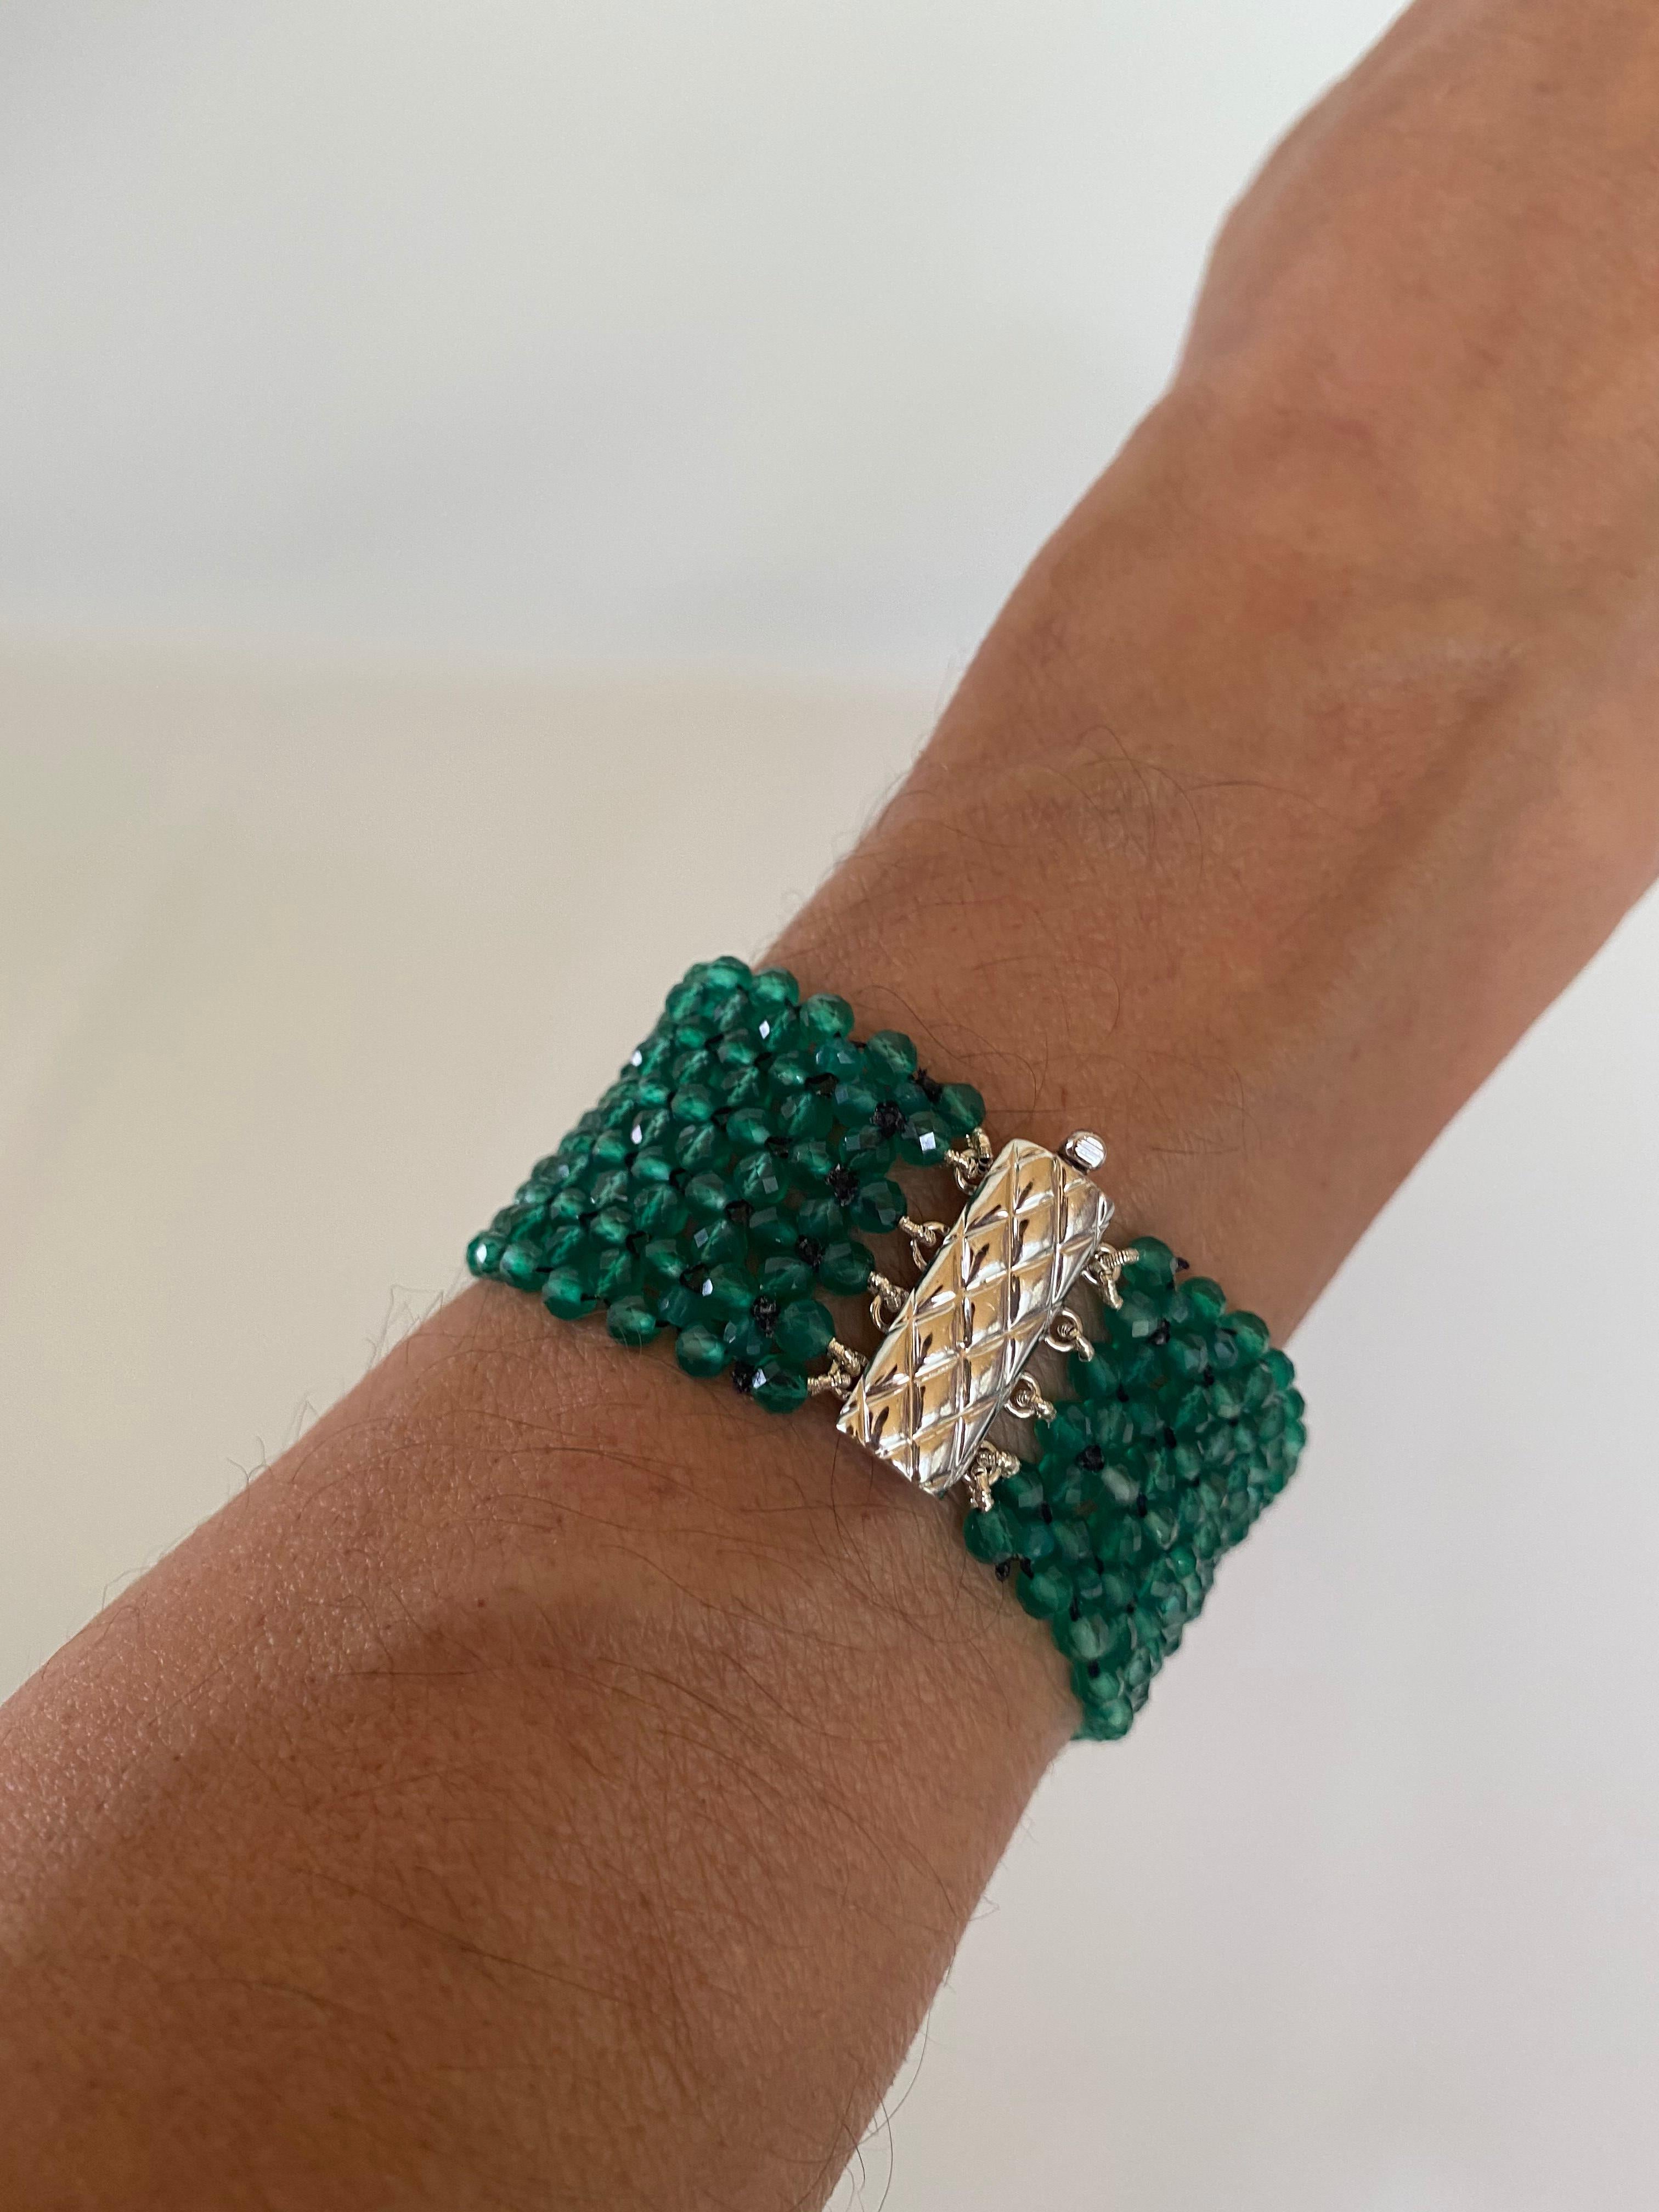 Marina J. Hand Woven Green Onyx beads Bracelet with Rhodium Plated  Silver clasp In New Condition For Sale In Los Angeles, CA